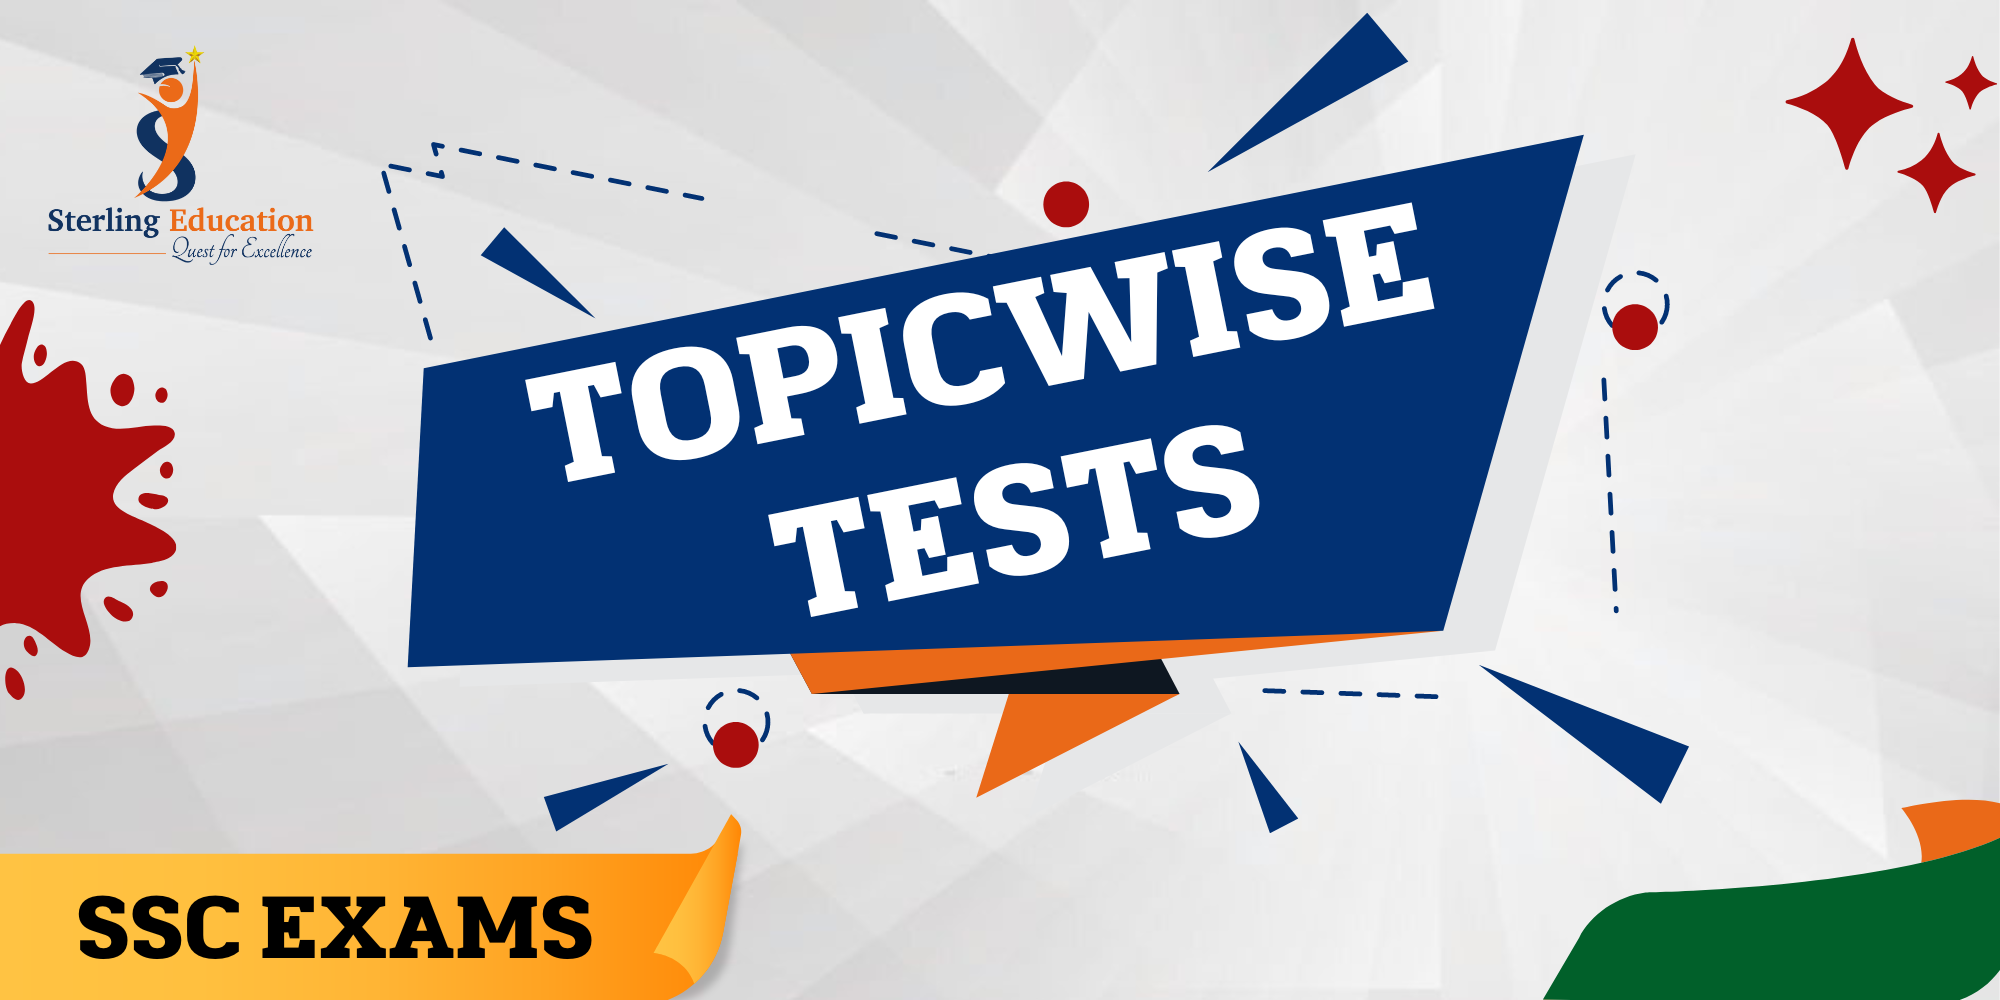 Topicwise Tests (SSC Exams)